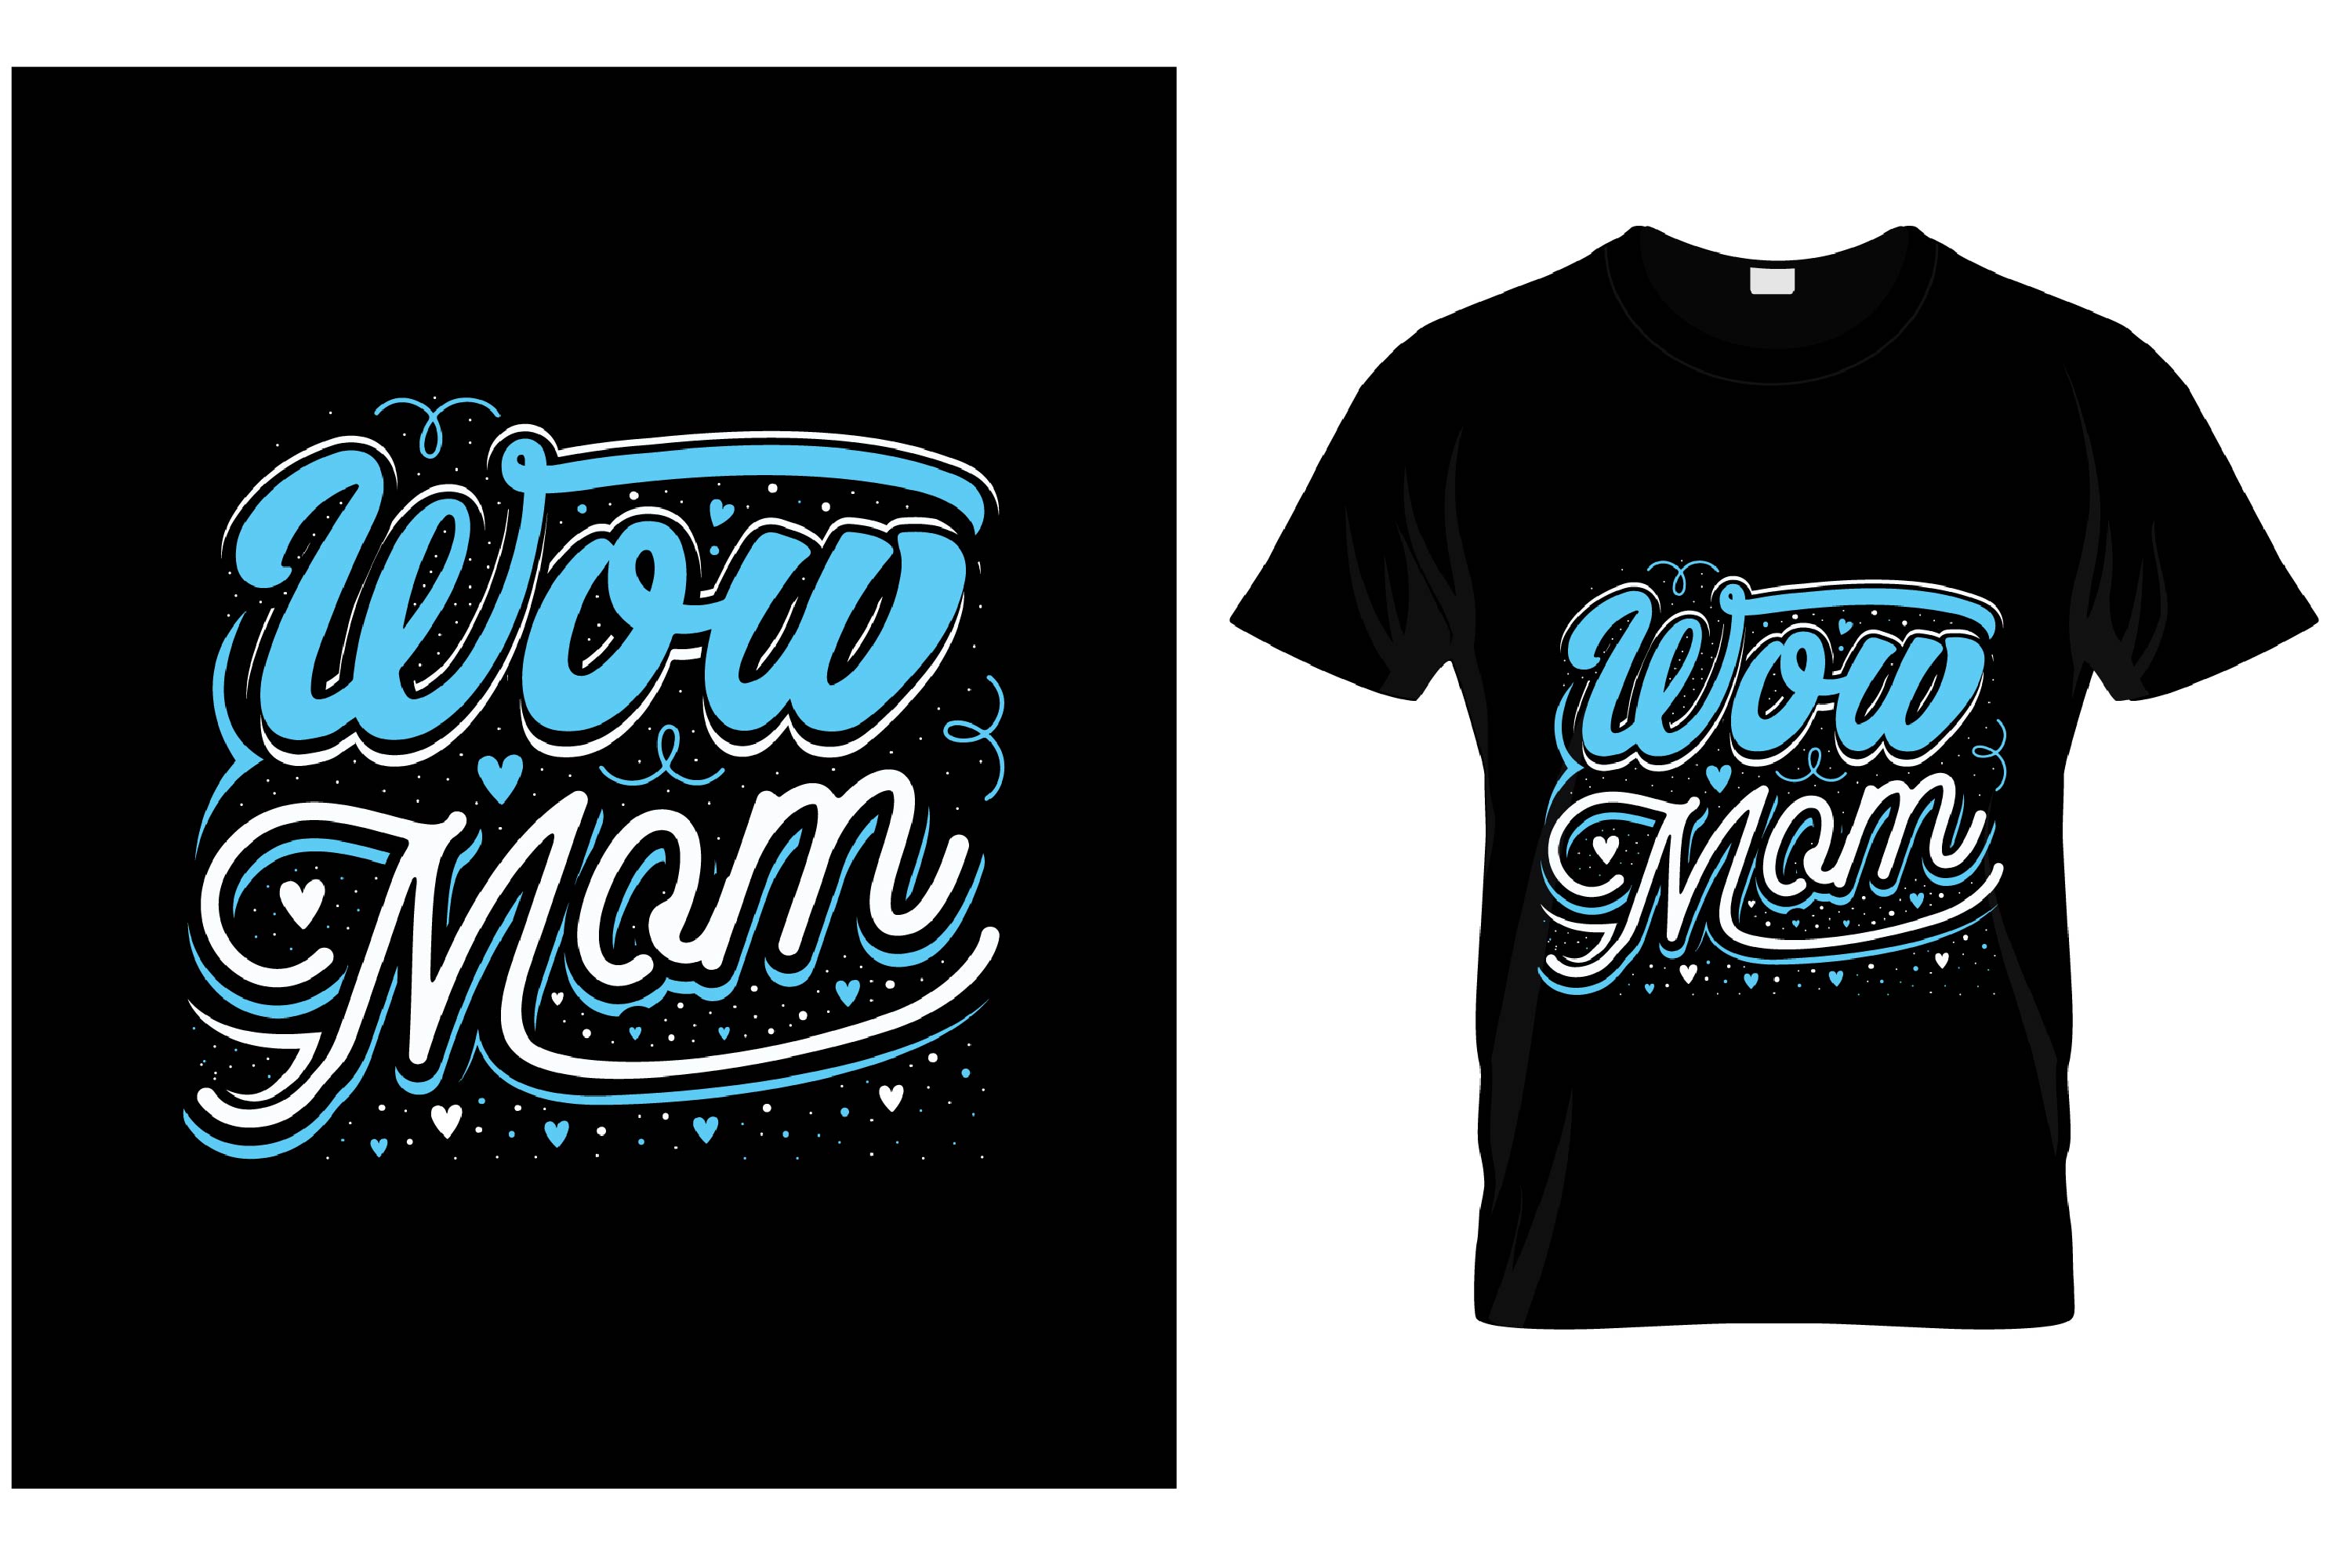 Image of a black t-shirt with an irresistible print in blue and white about mom.